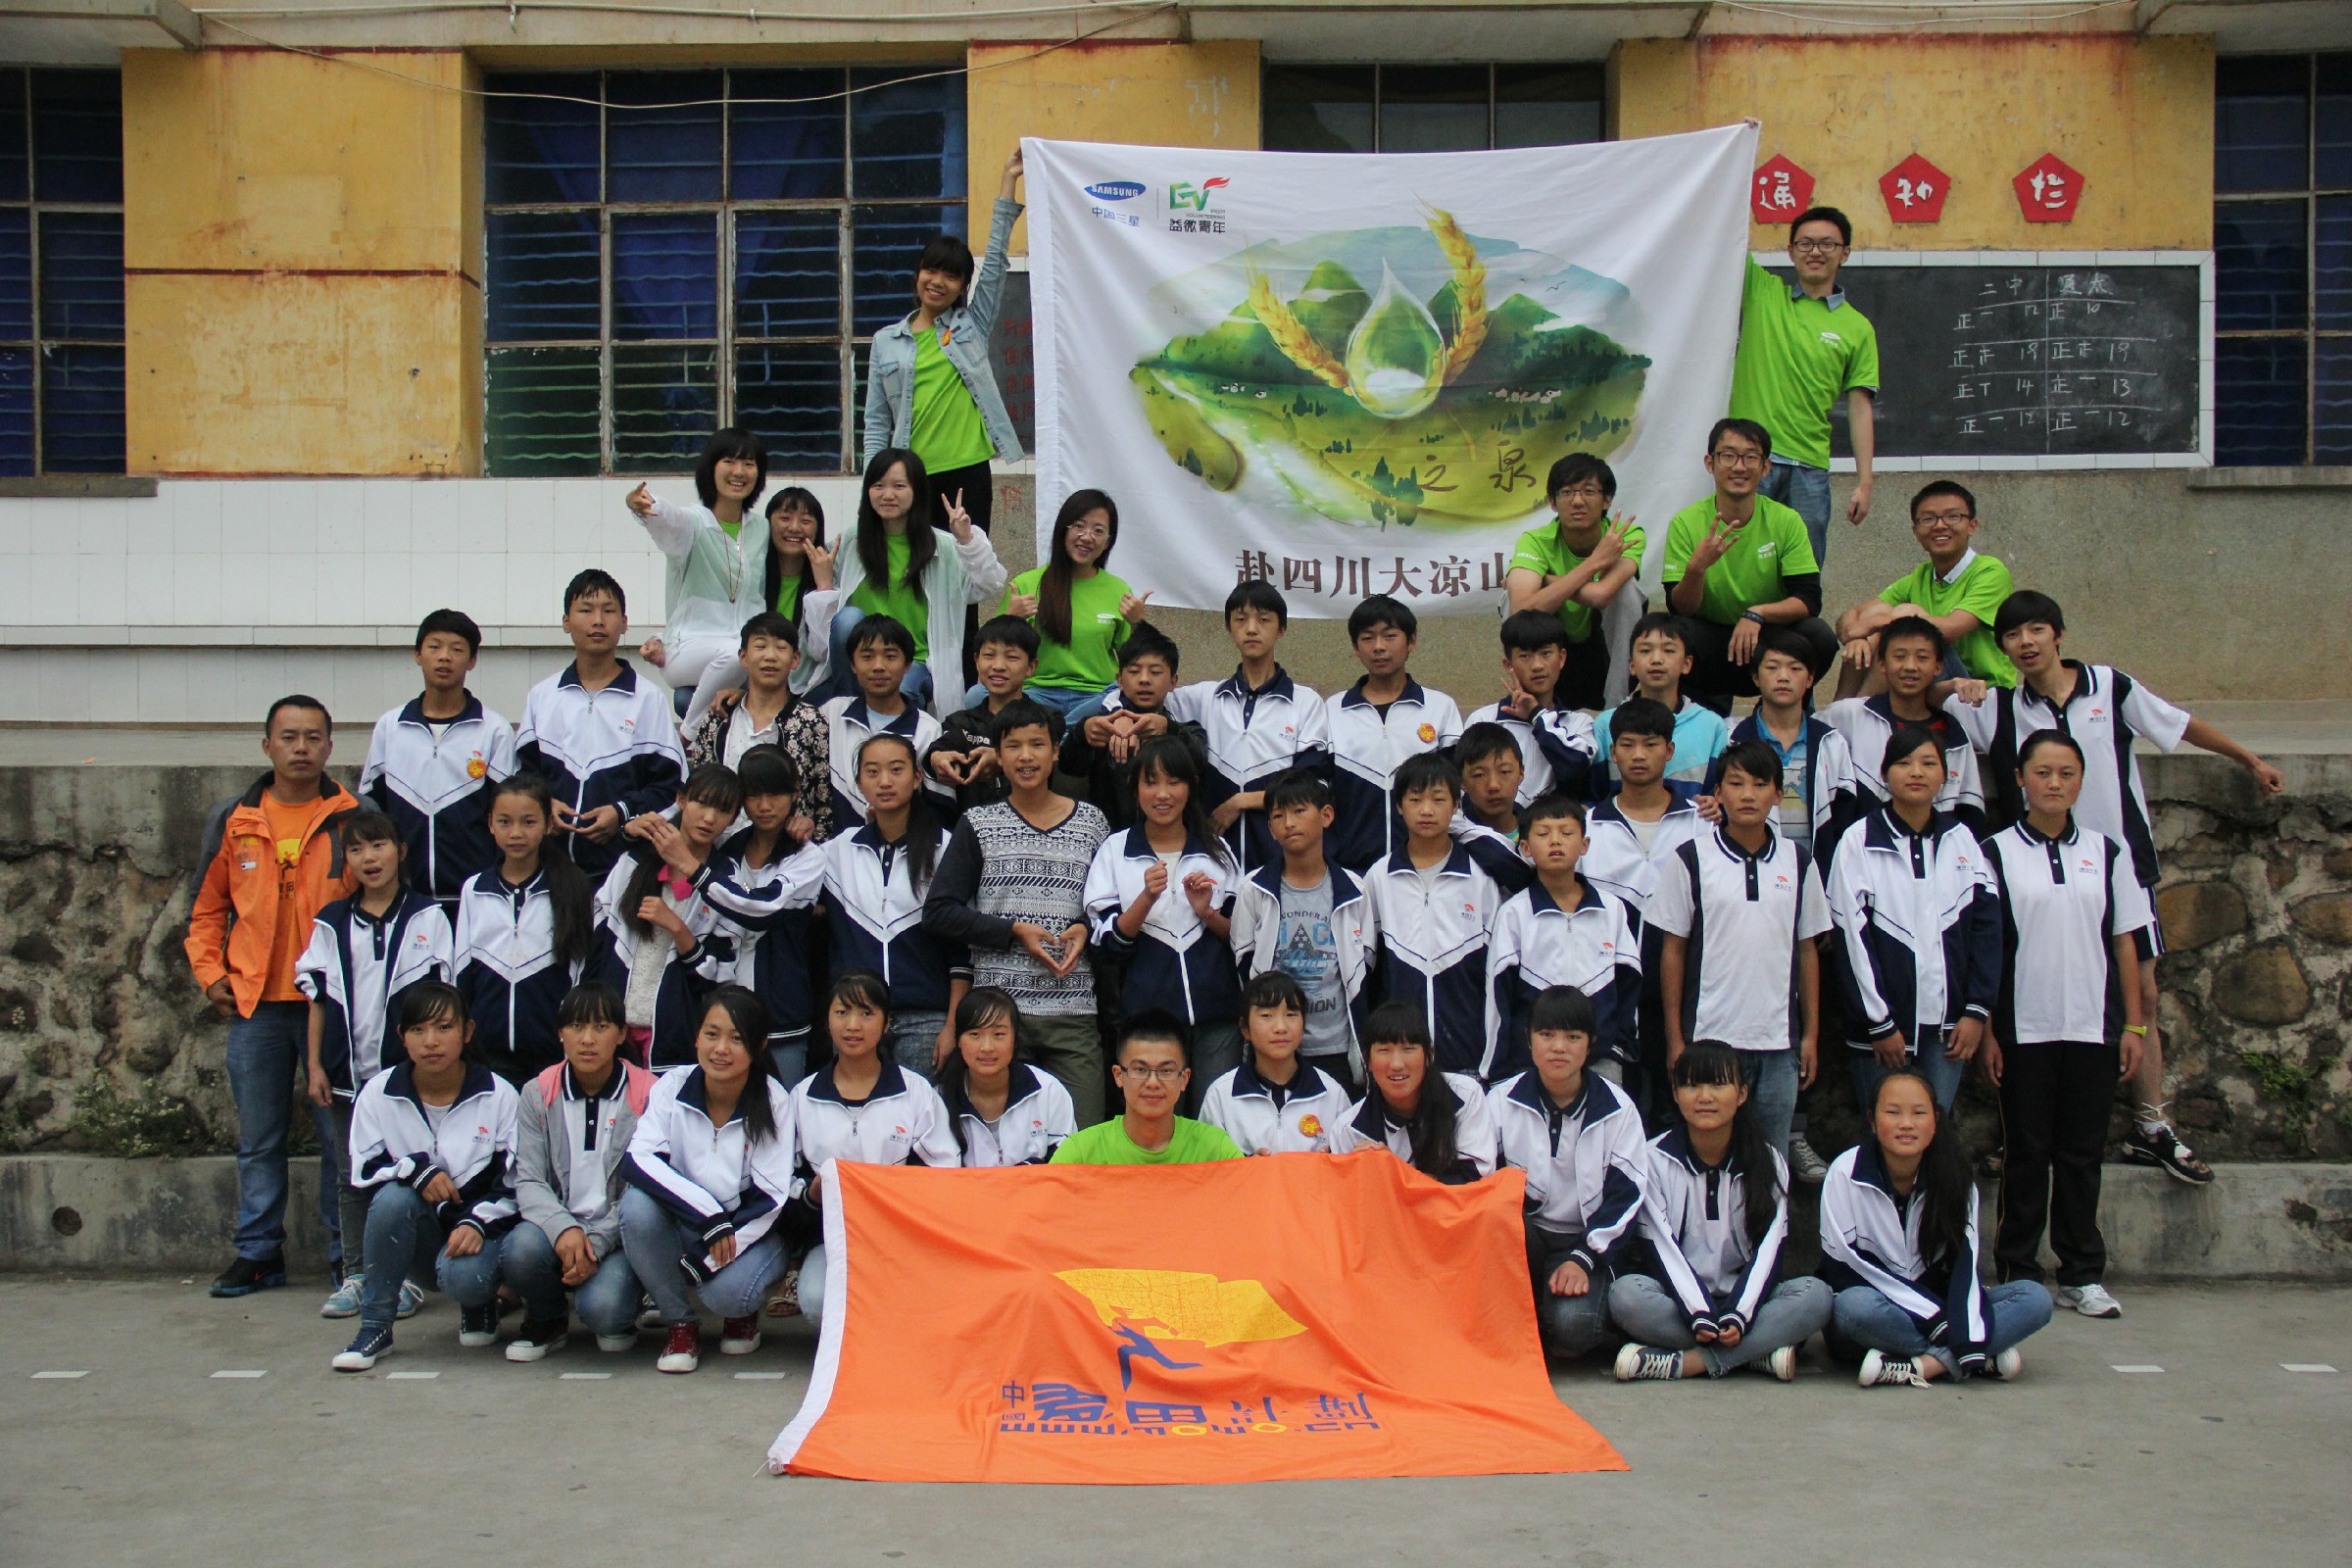 EV-sichuan-group-picture-Students.jpg